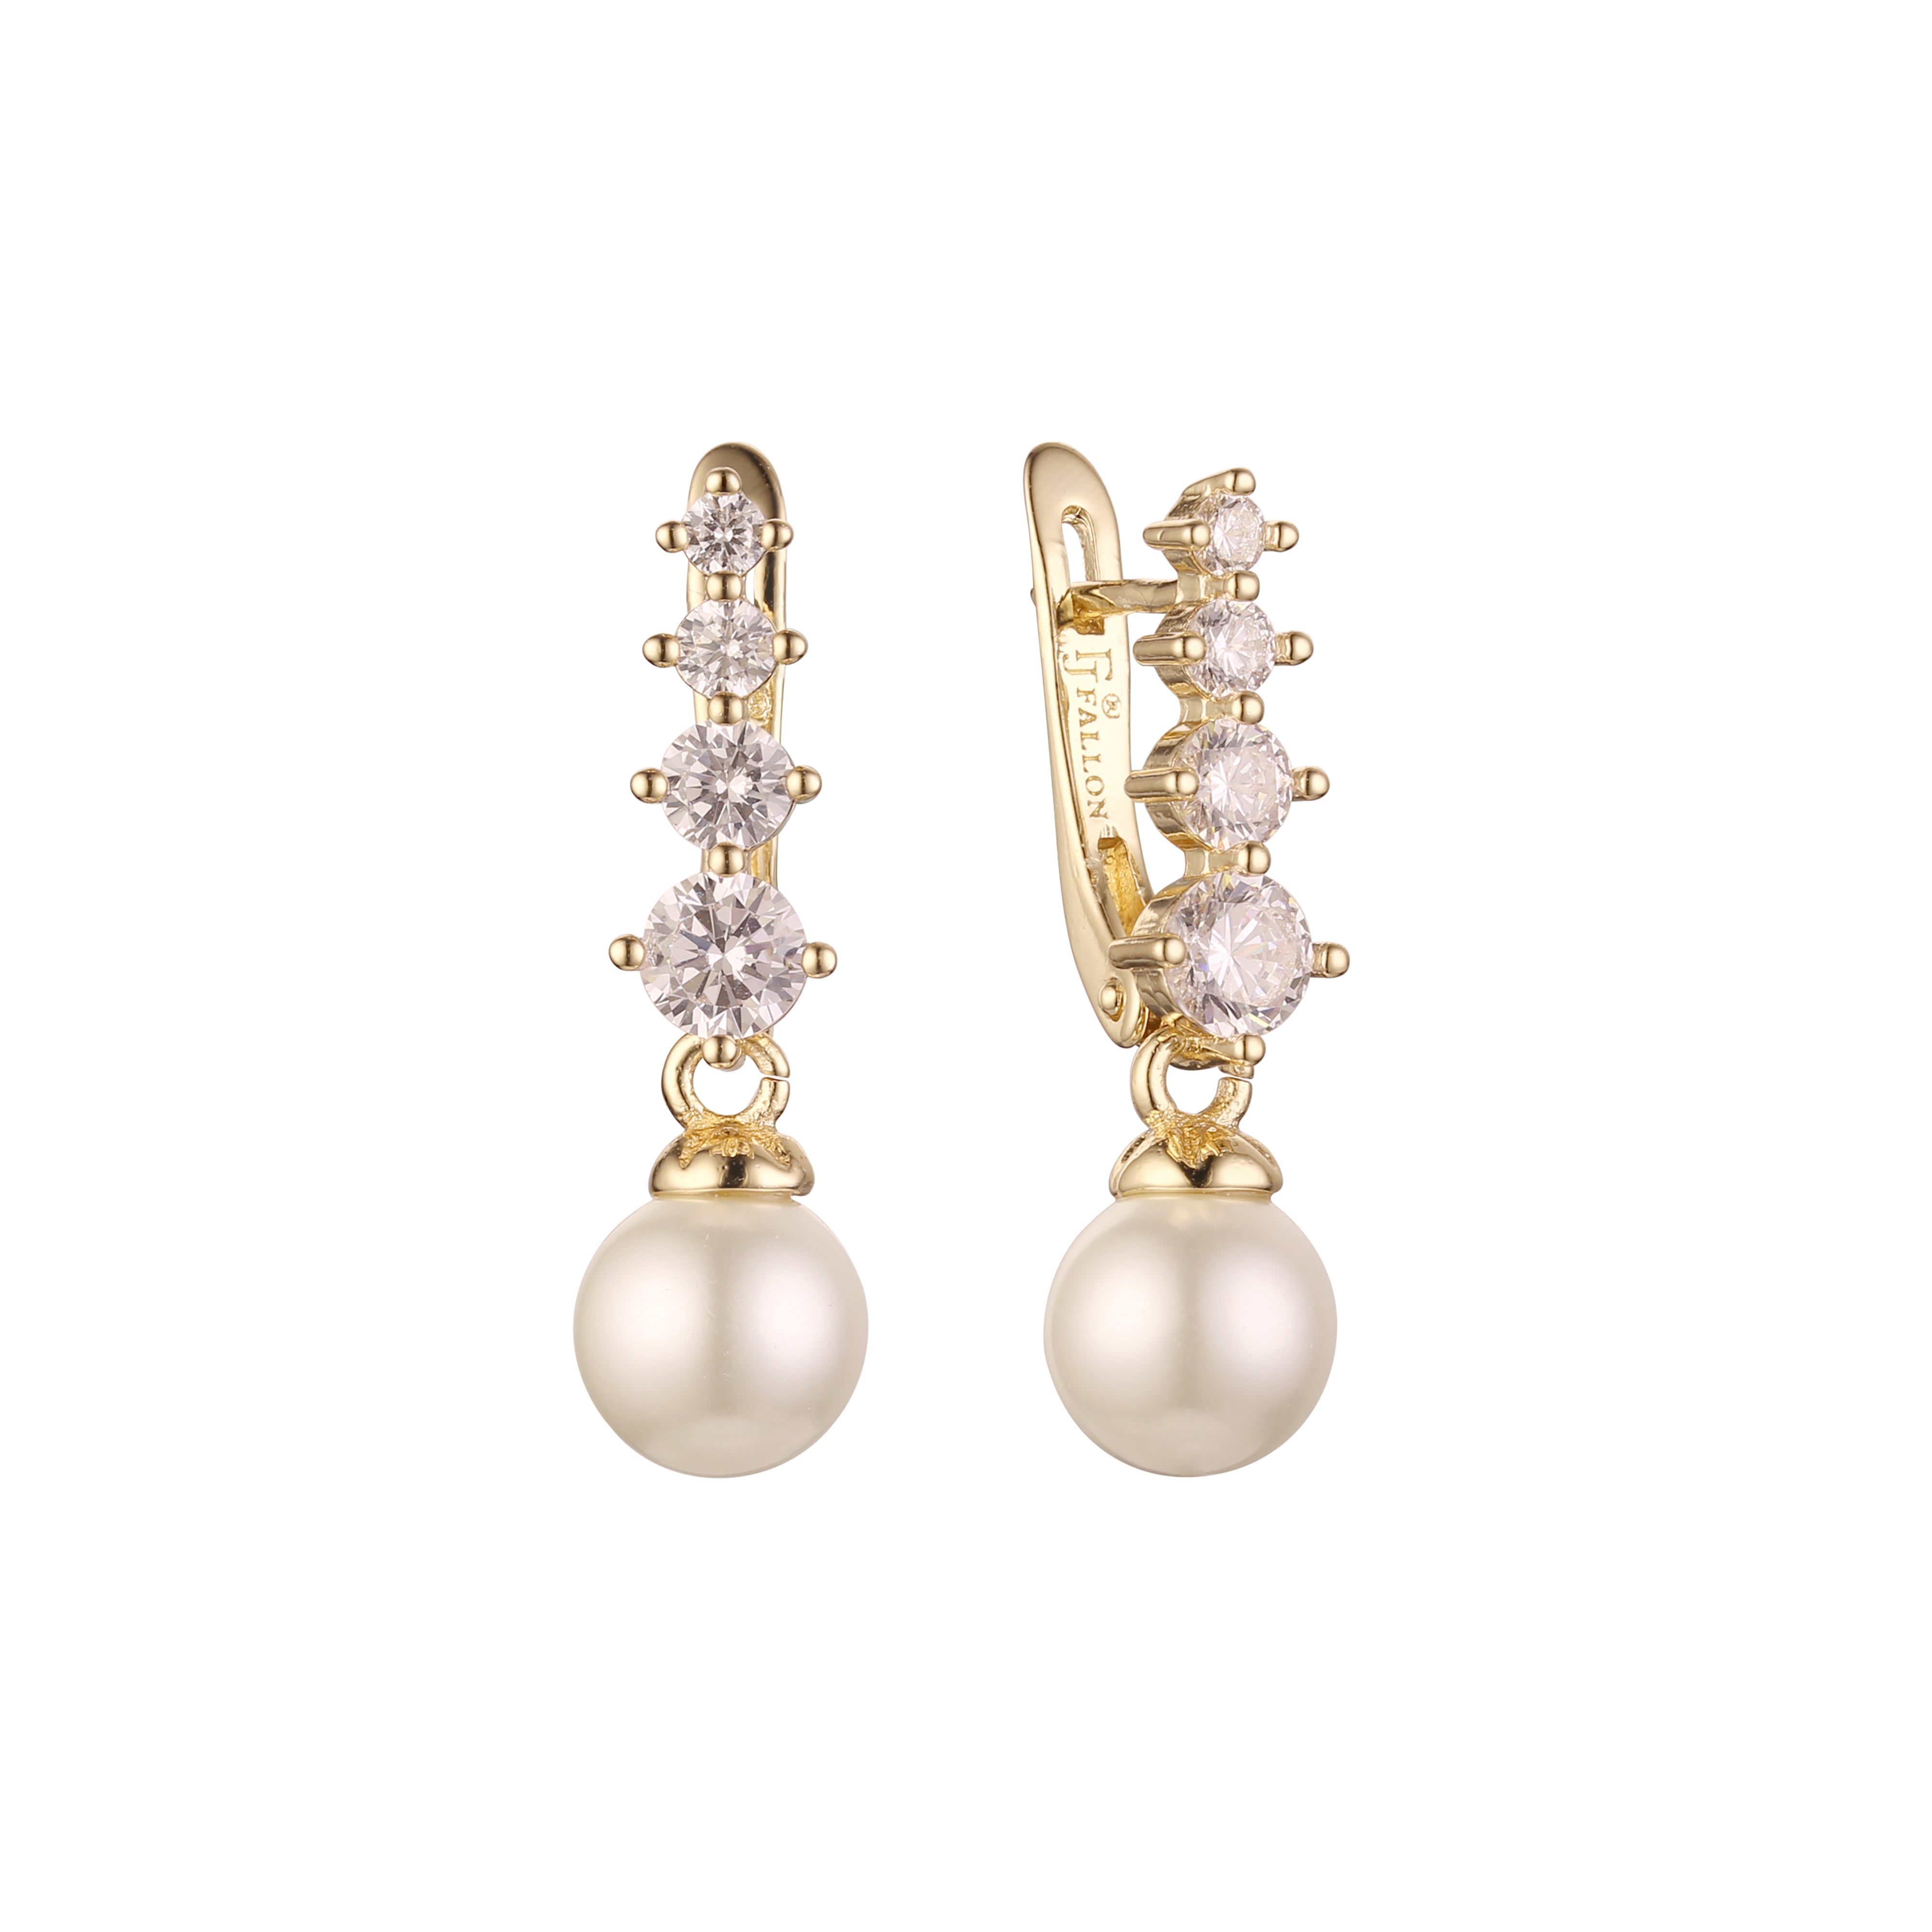 Pearl cluster earrings in 14K Gold, Rose Gold plating colors